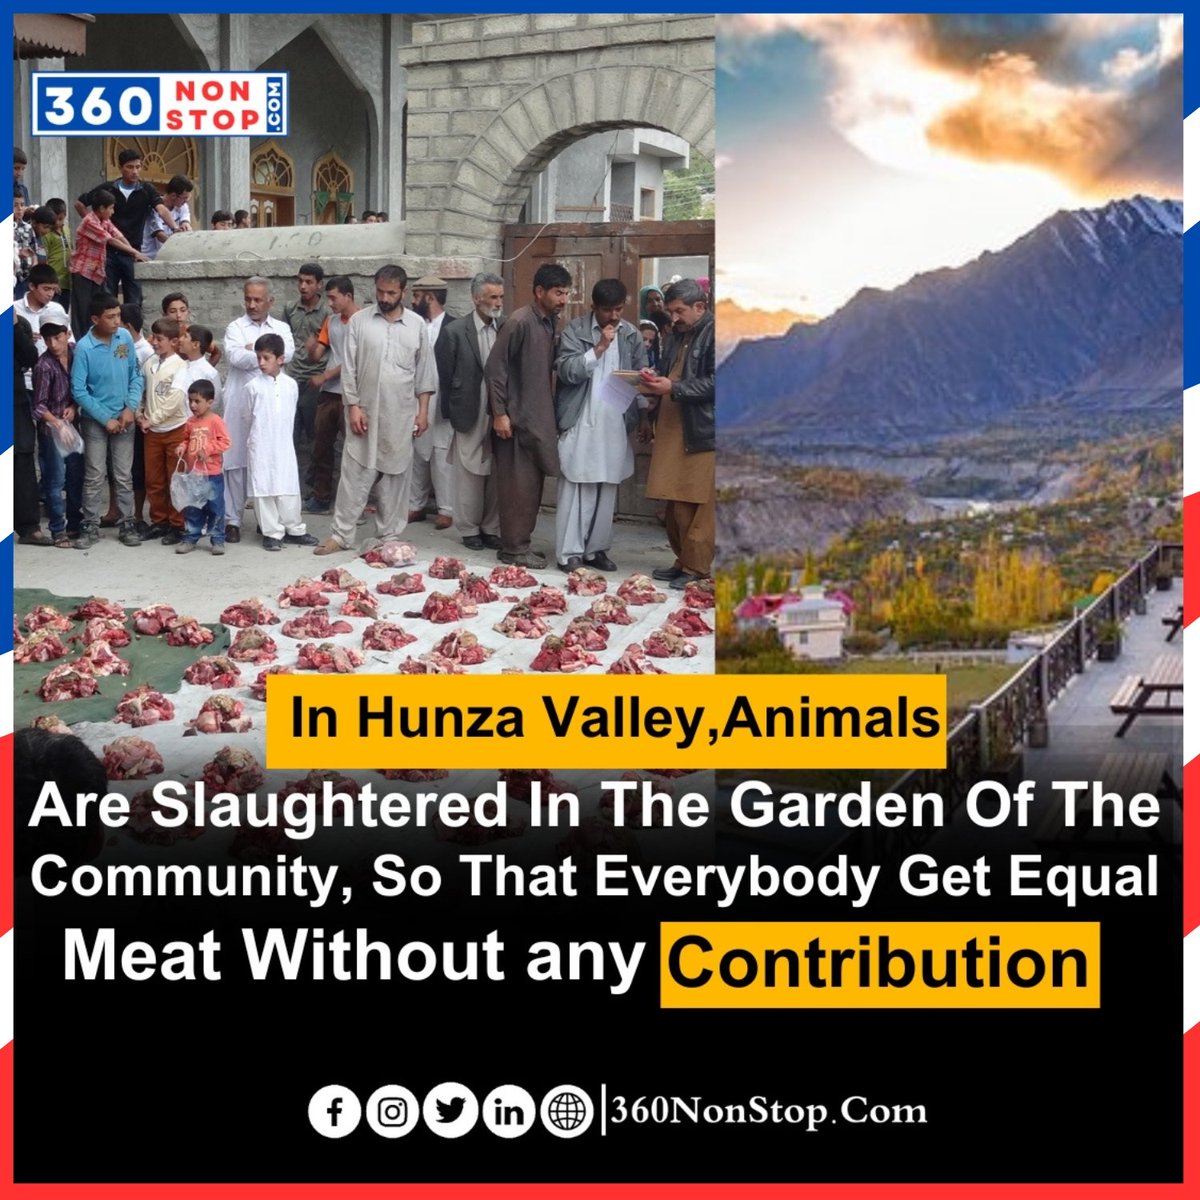 In Hunza Valley, Animals Are Slaughtered In The Garden Of The Community, So That Everybody Get Equal Meet Without Any Contribution.

#HunzaValley #CommunitySharing #AnimalSlaughter #EqualDistribution #CollectiveMeat #SharingCulture  #CulturalHeritage #MutualSupport #360NonStop